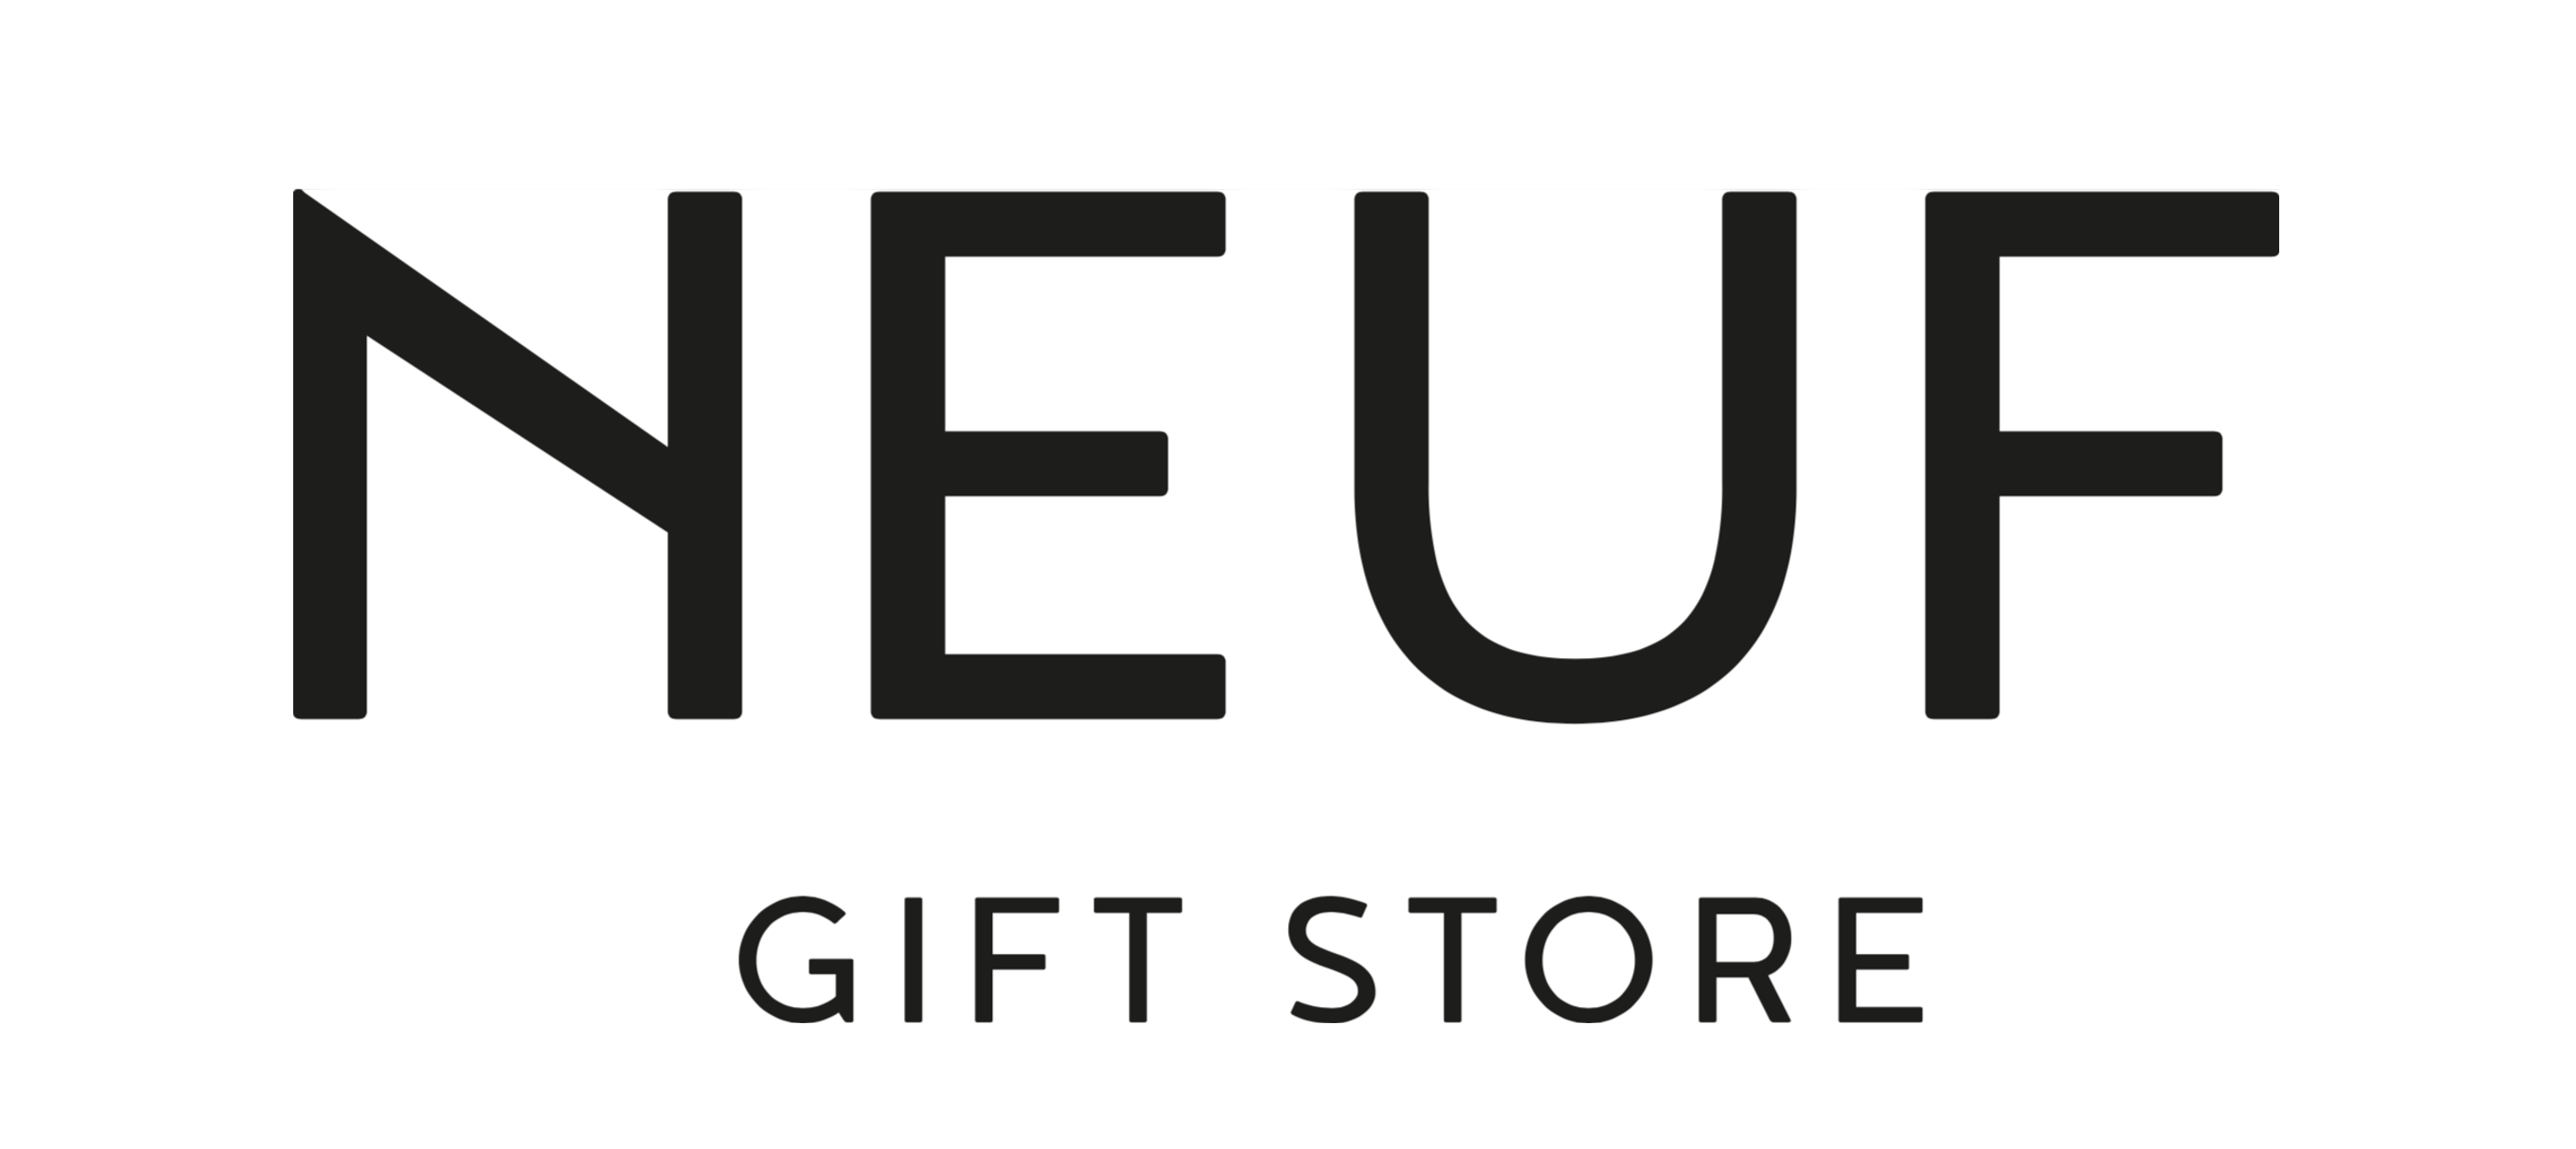 Gift Store - Treat yourself, and others